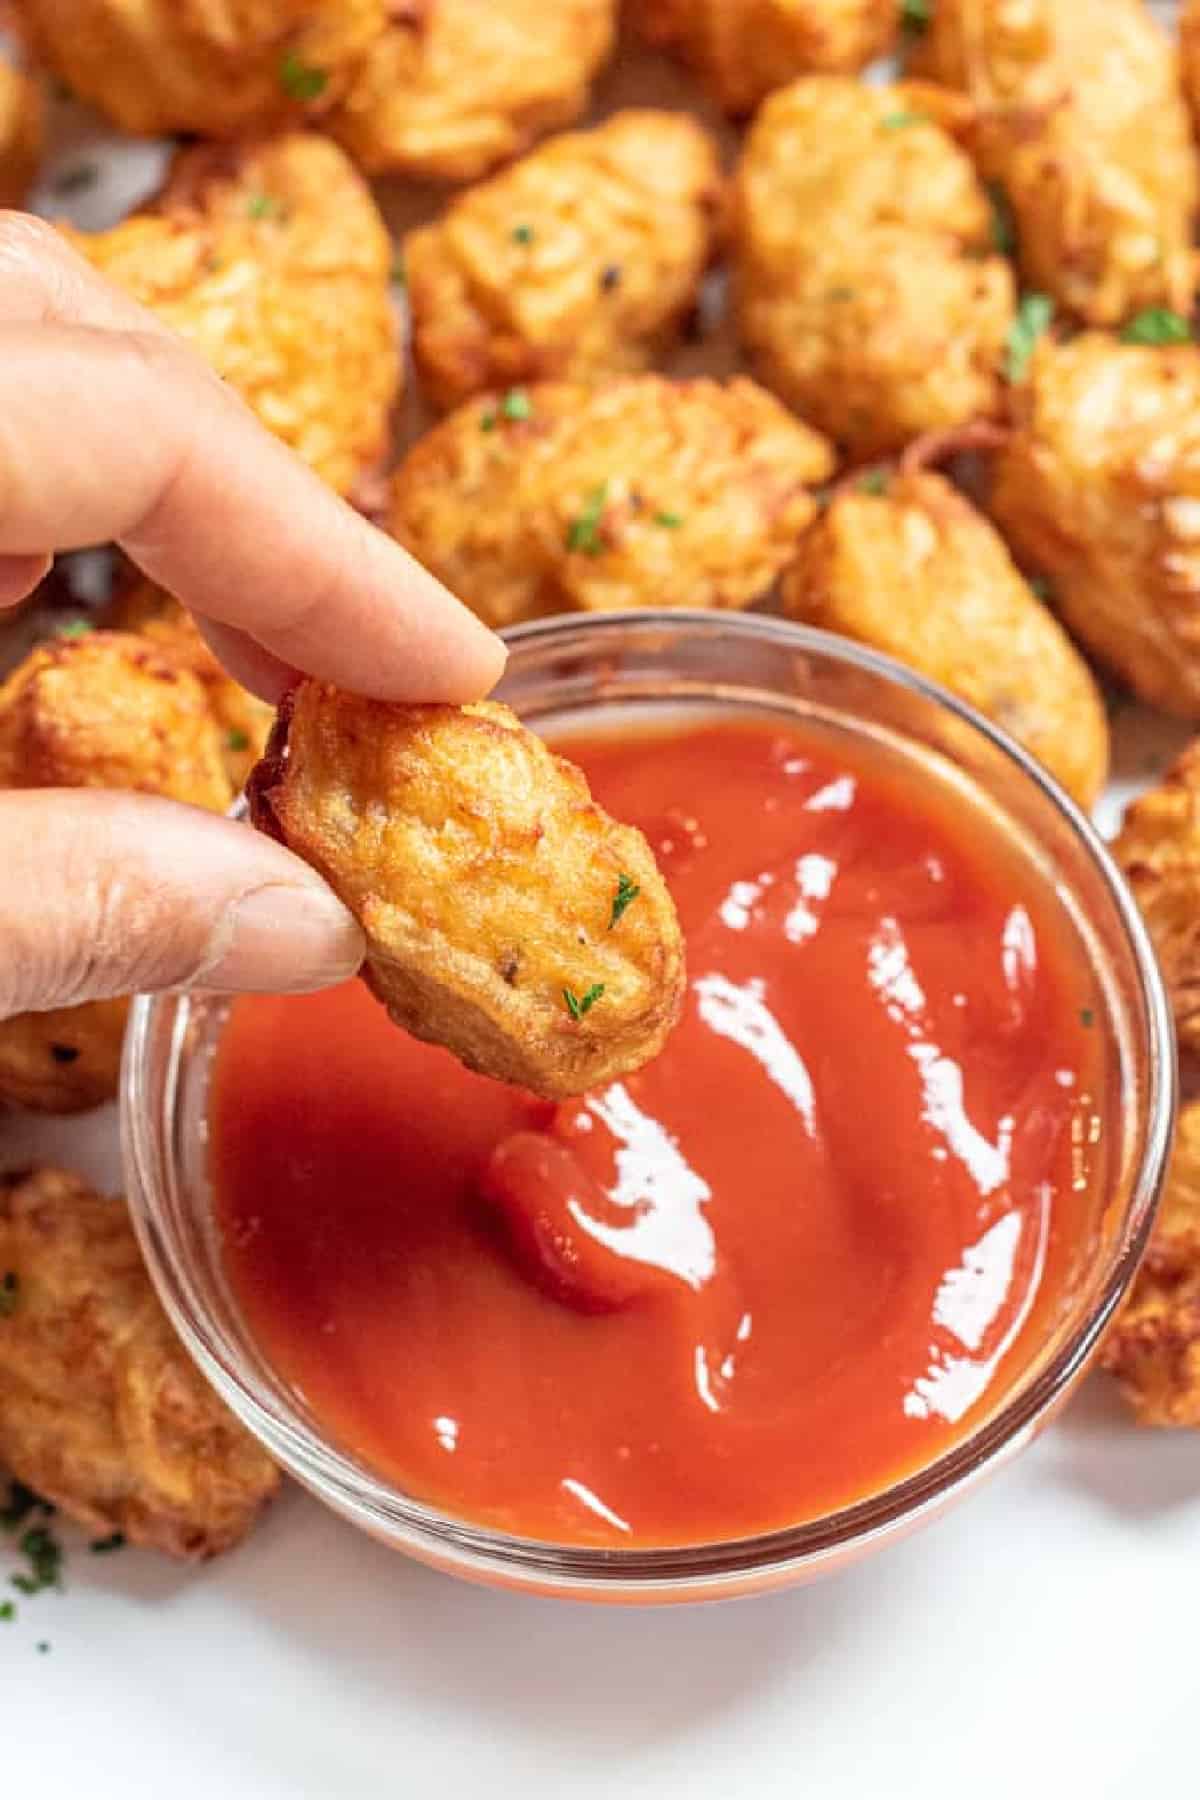 a hand holding up a tater tot with ketchup.